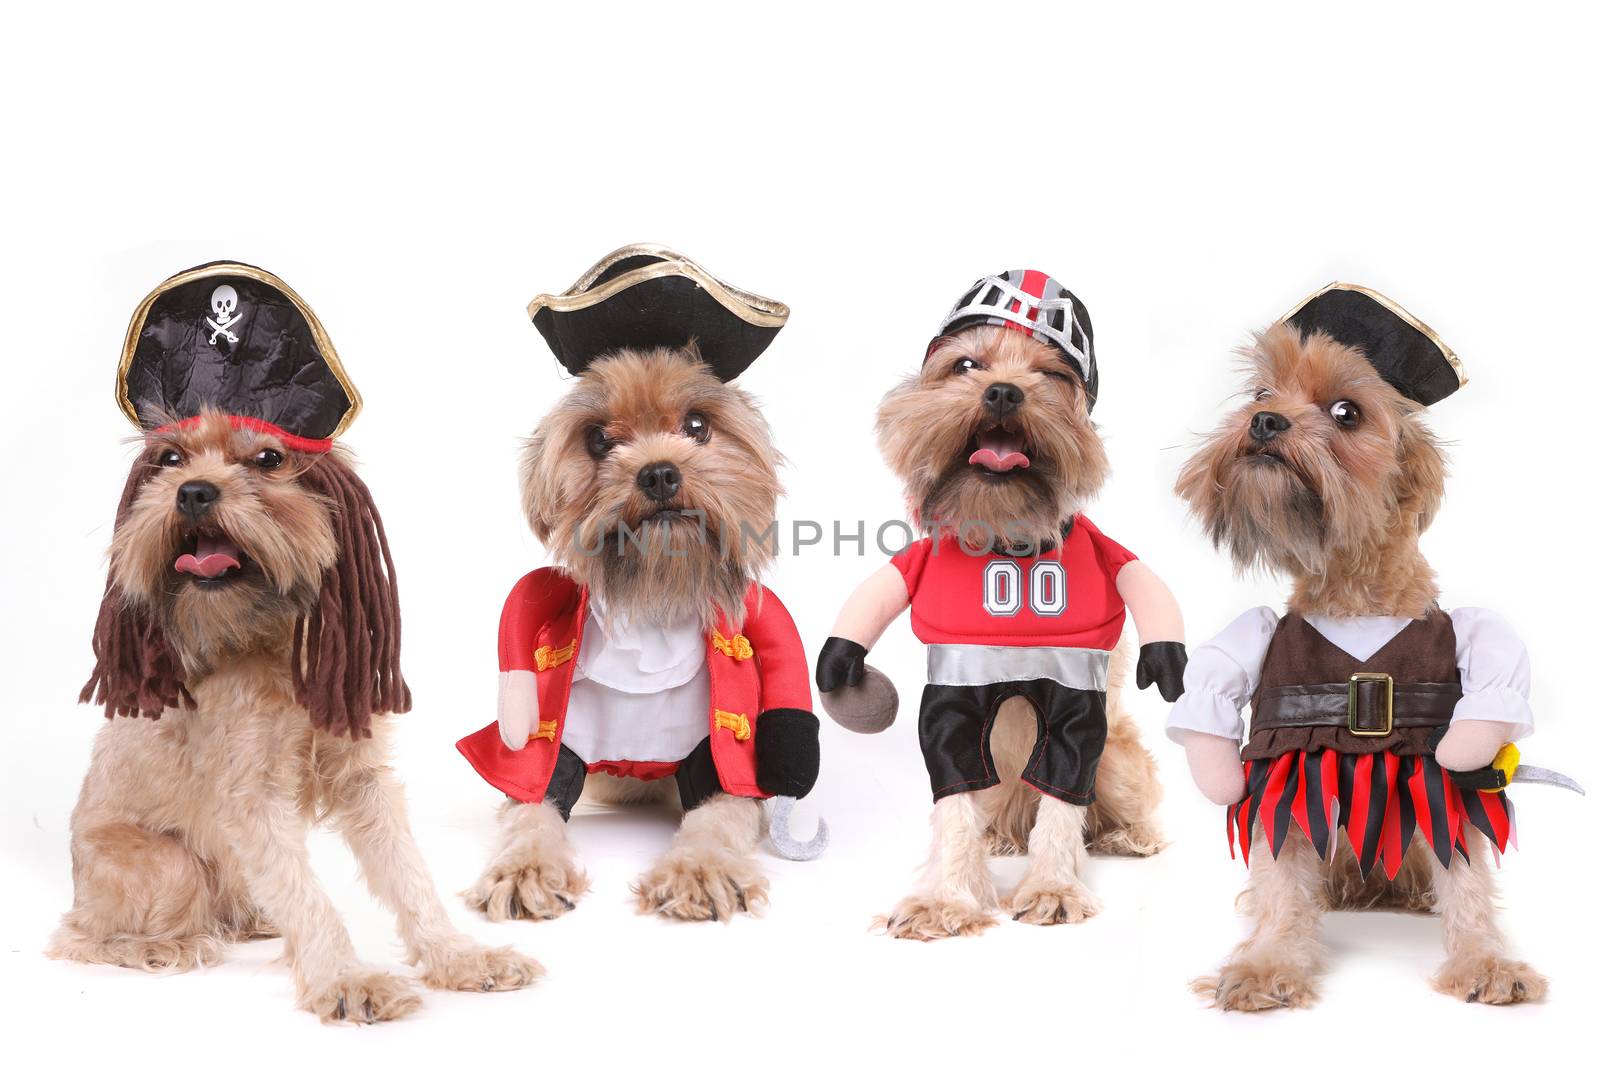 Multiple Dogs in Pirate and Football Costumes